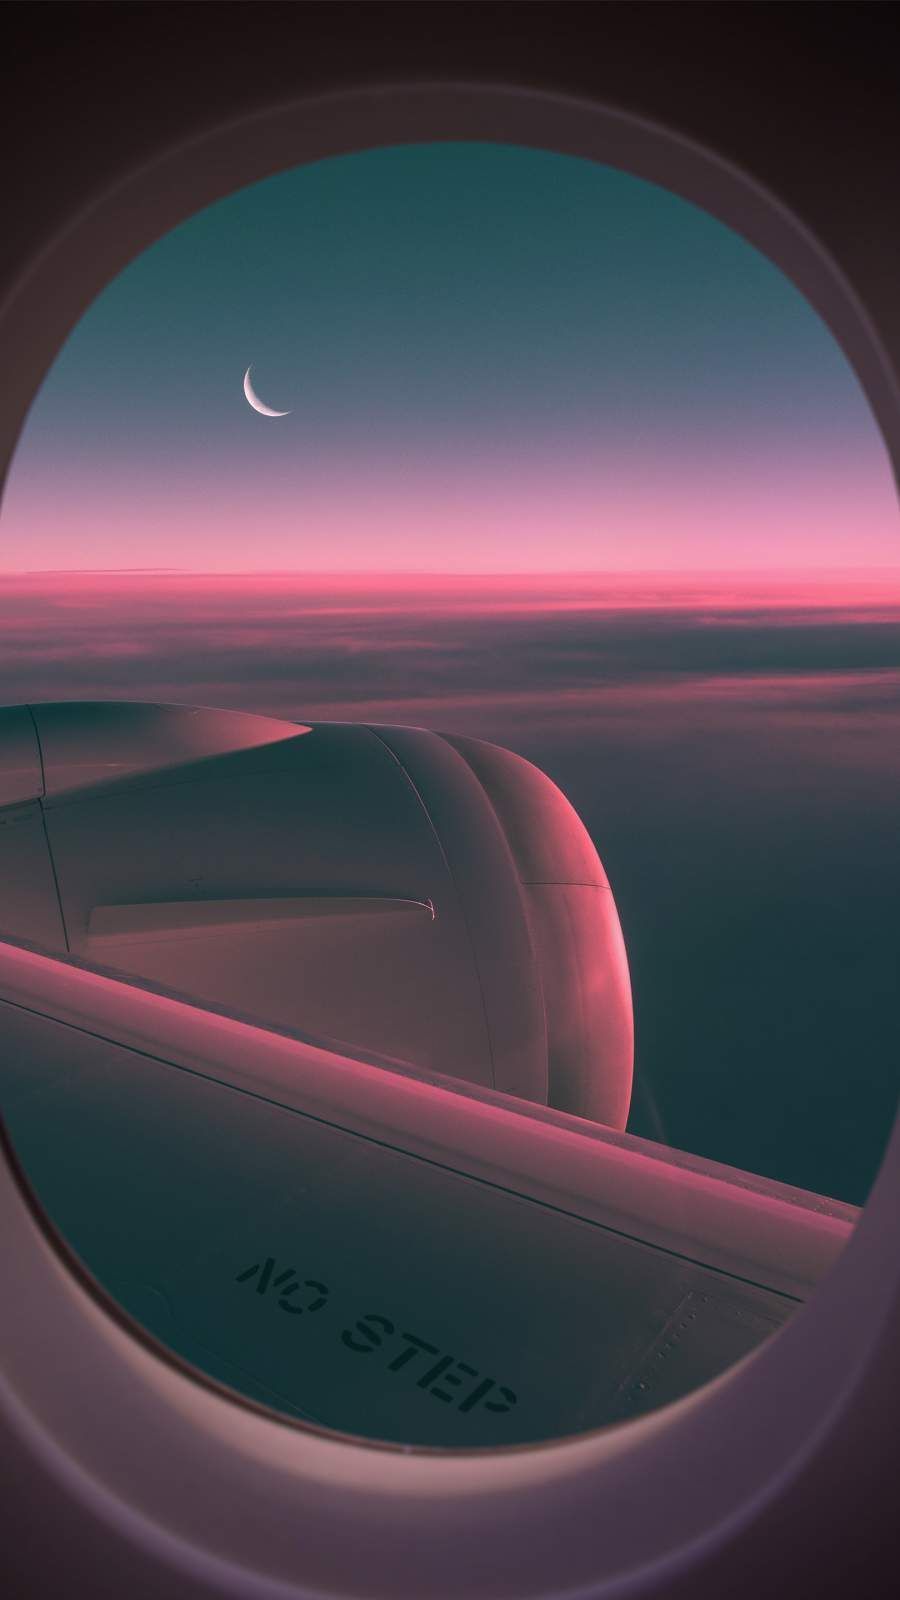 Airplane Window iPhone Wallpaper #darkiphonewallpaper Airplane Window iPhone Wallpaper #dar. Airplane window, iPhone wallpaper airplane, iPhone wallpaper for guys